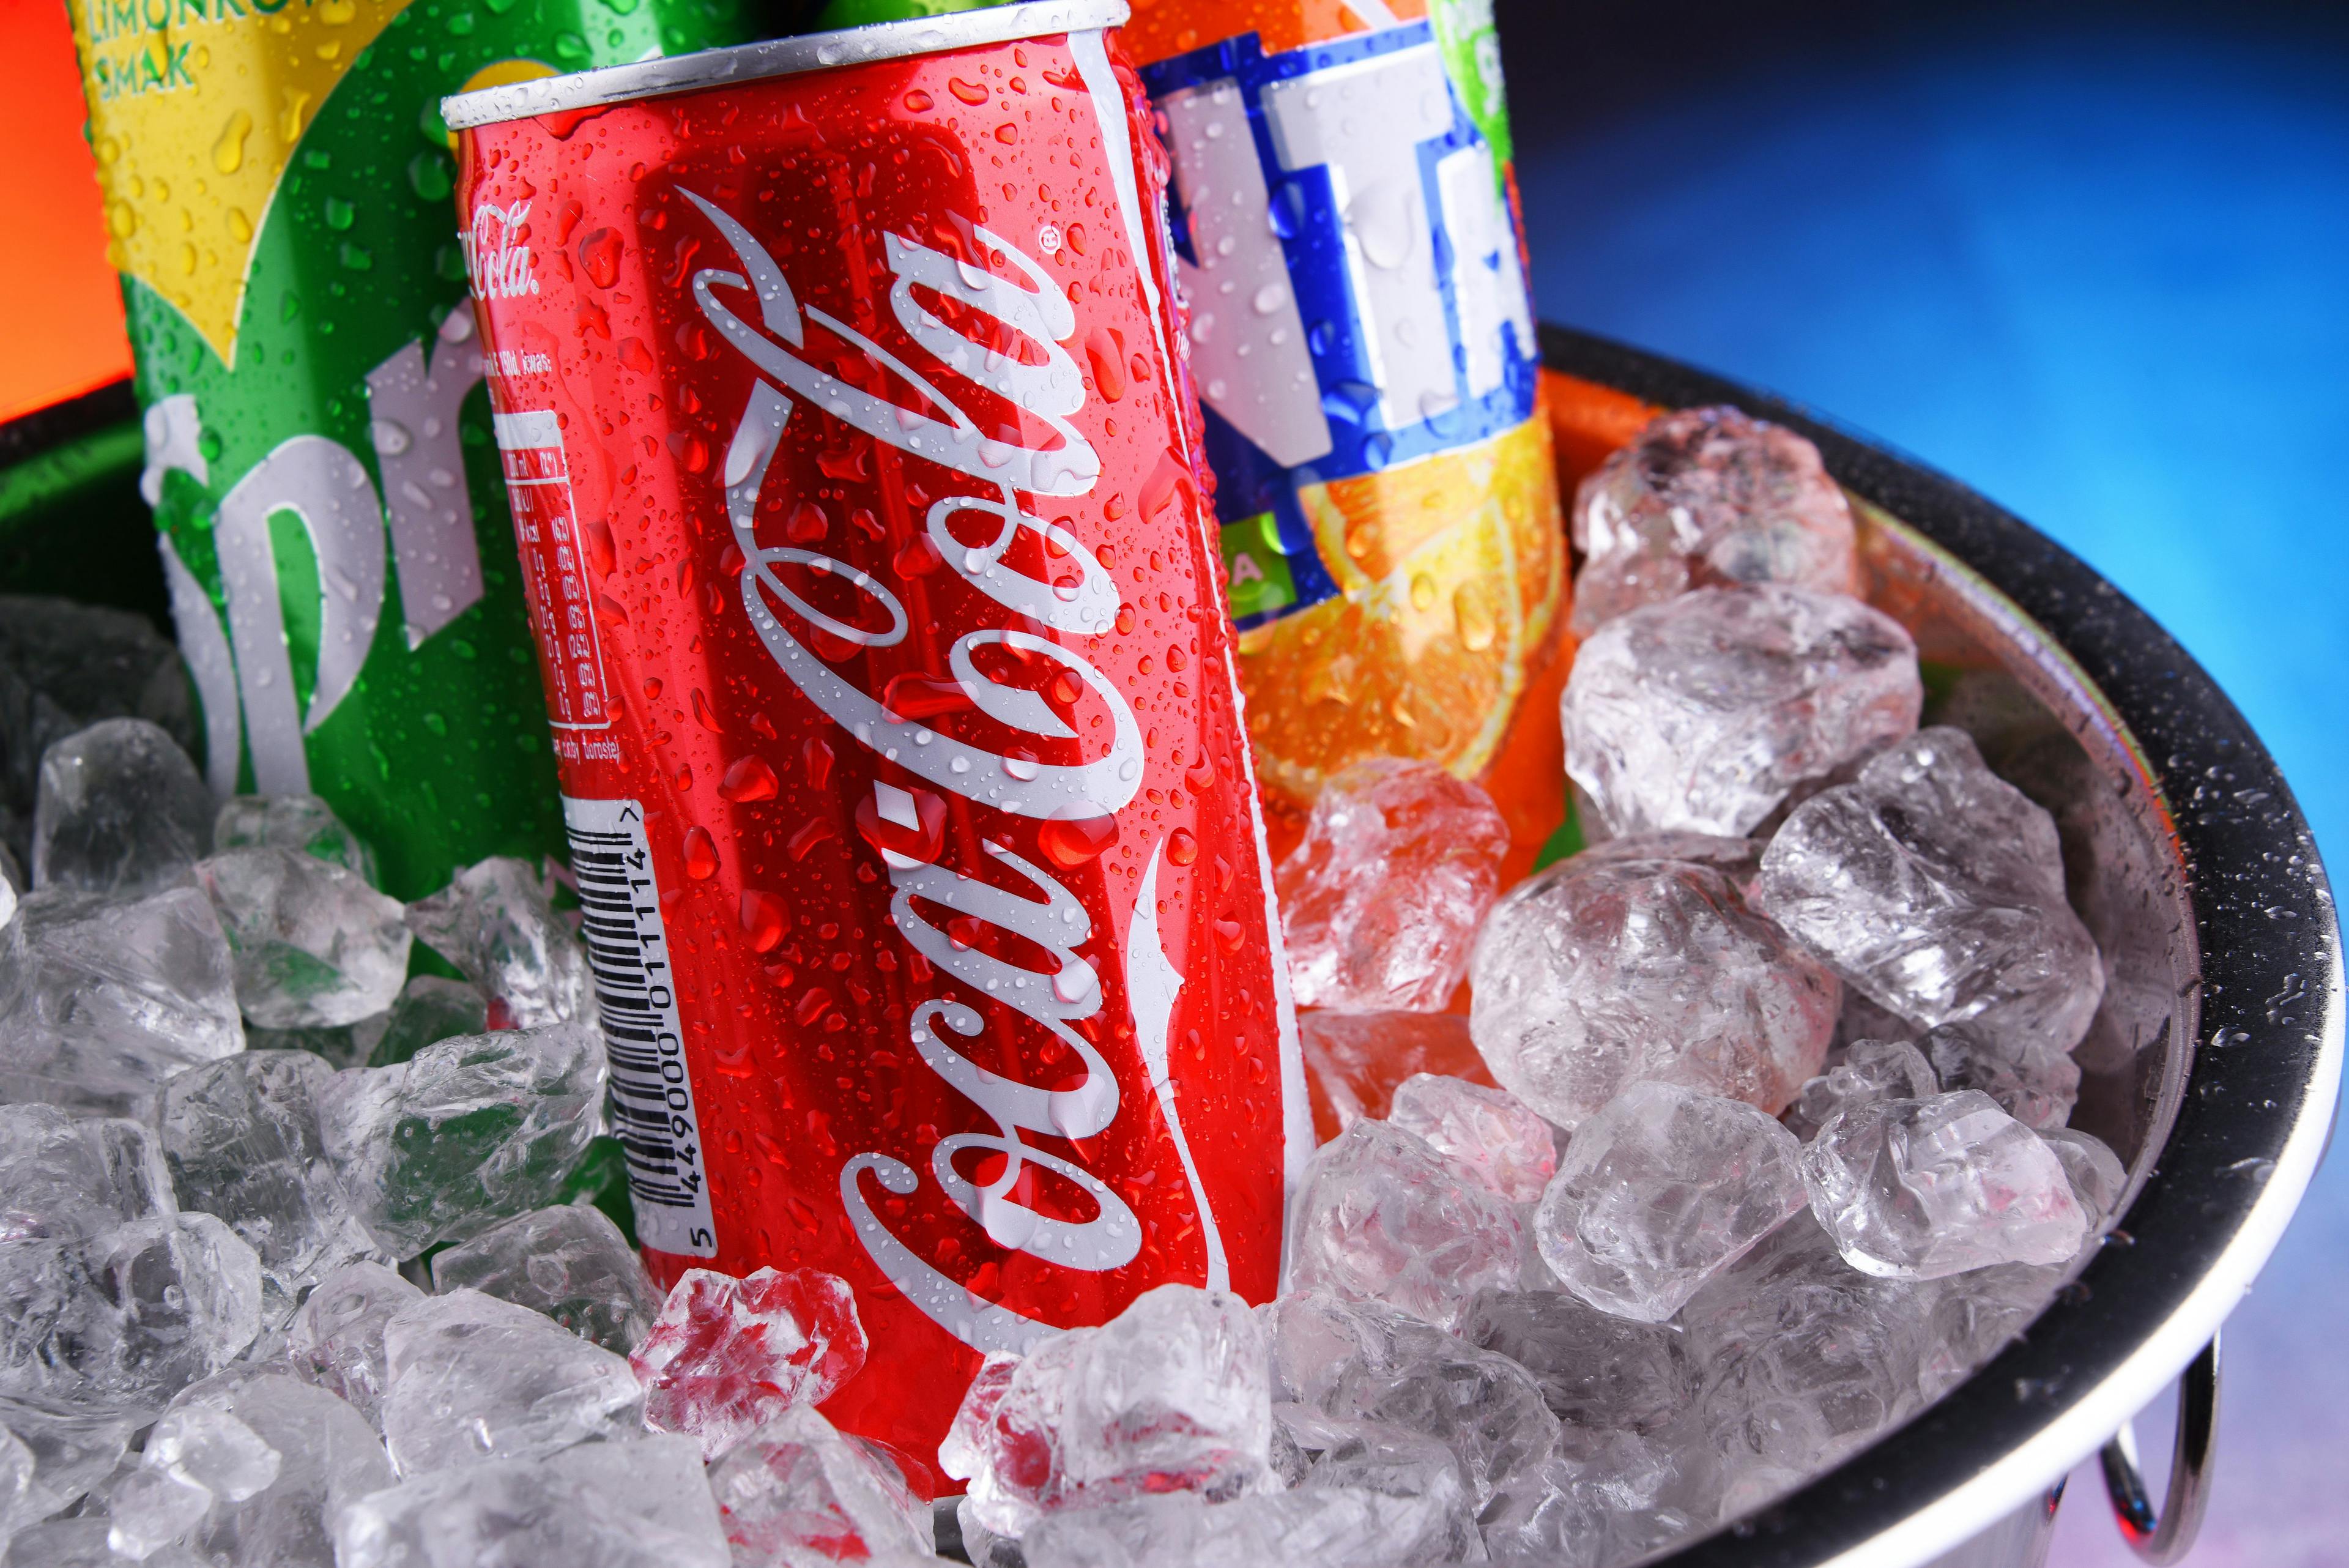 Cans of assorted Coca Cola Company soft drinks | Image Credit: © monticellllo - stock.adobe.com.